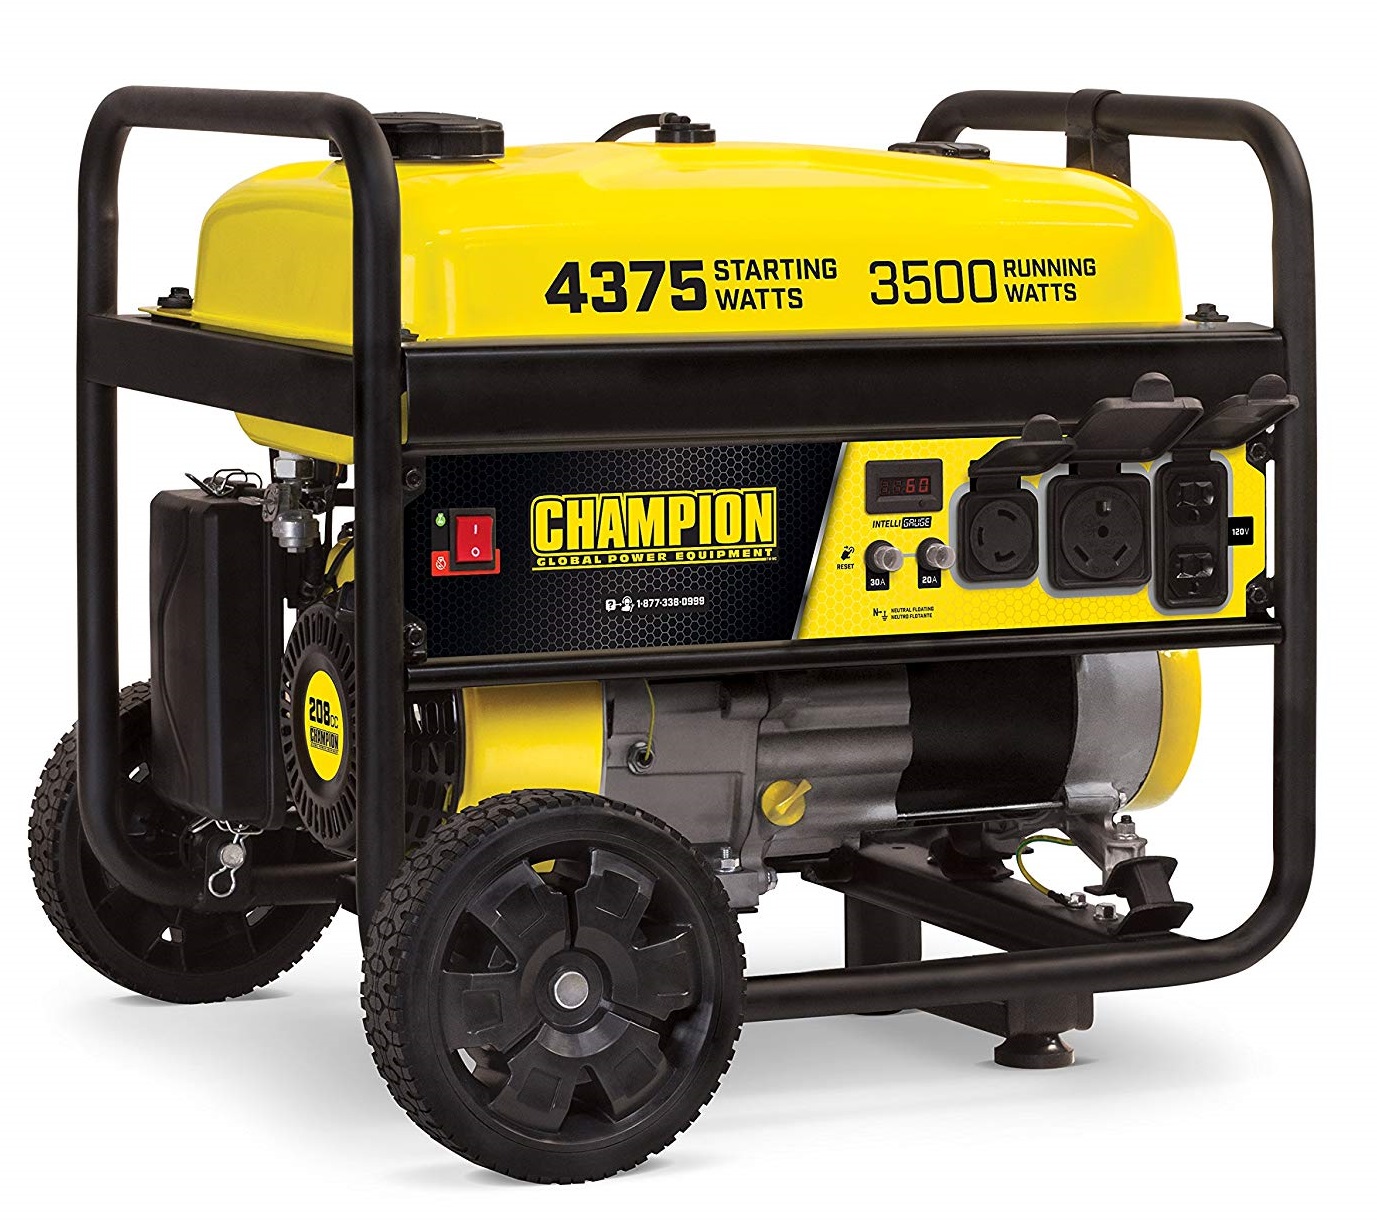 Best Portable Generators for 2021 | Reviews & Buyer's Guide Champion Generator Runs Then Shuts Off